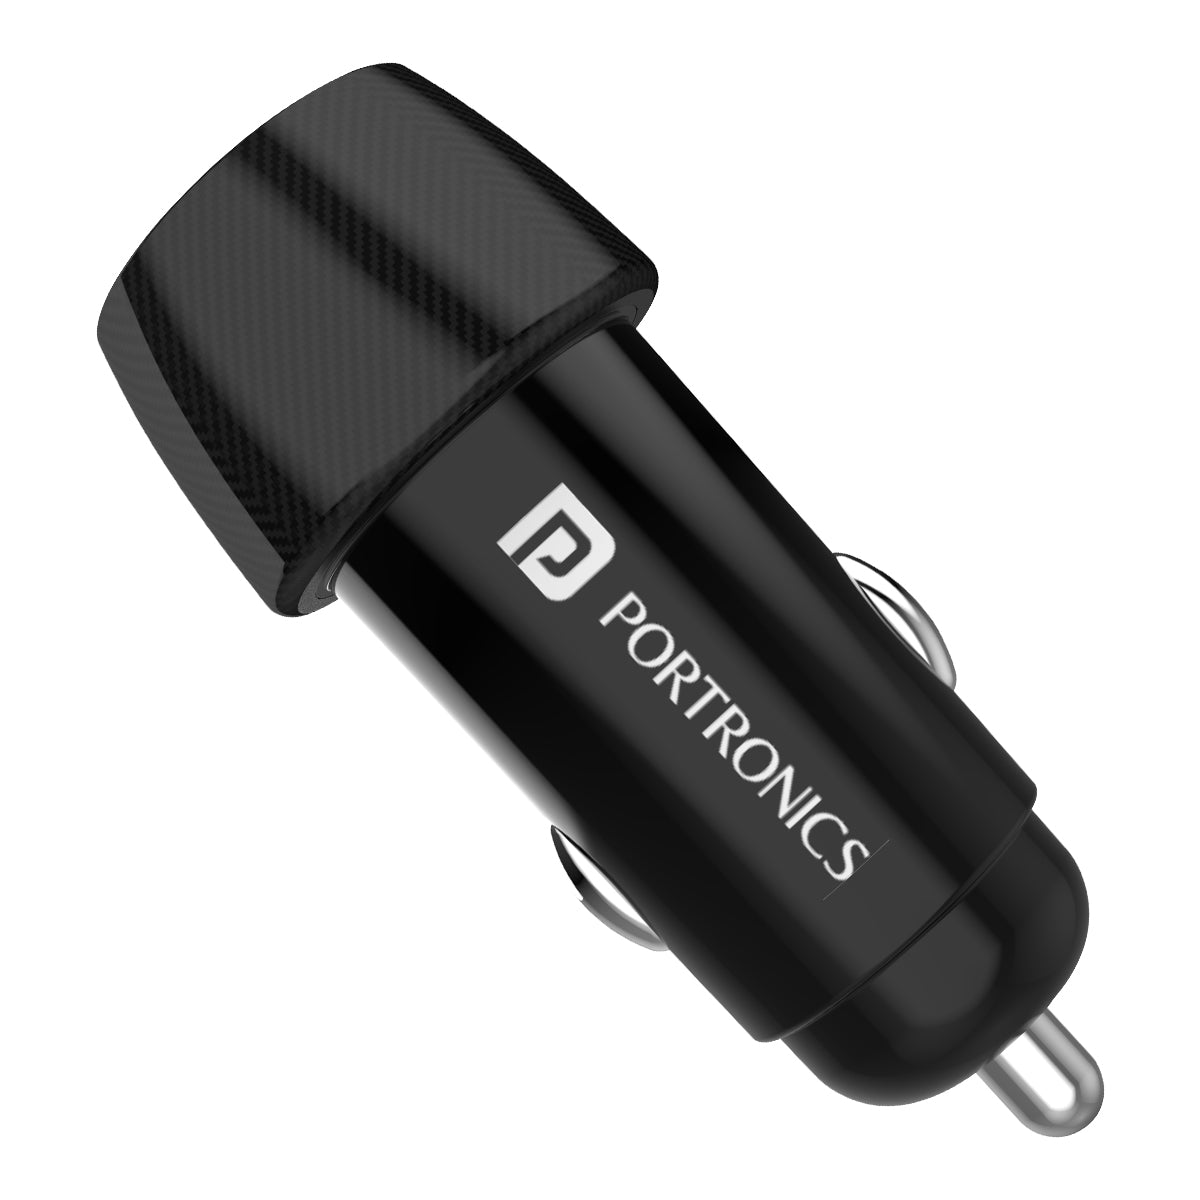 Black Car Power 14 car accessories portable car charger with QC & PD charging ports 40W